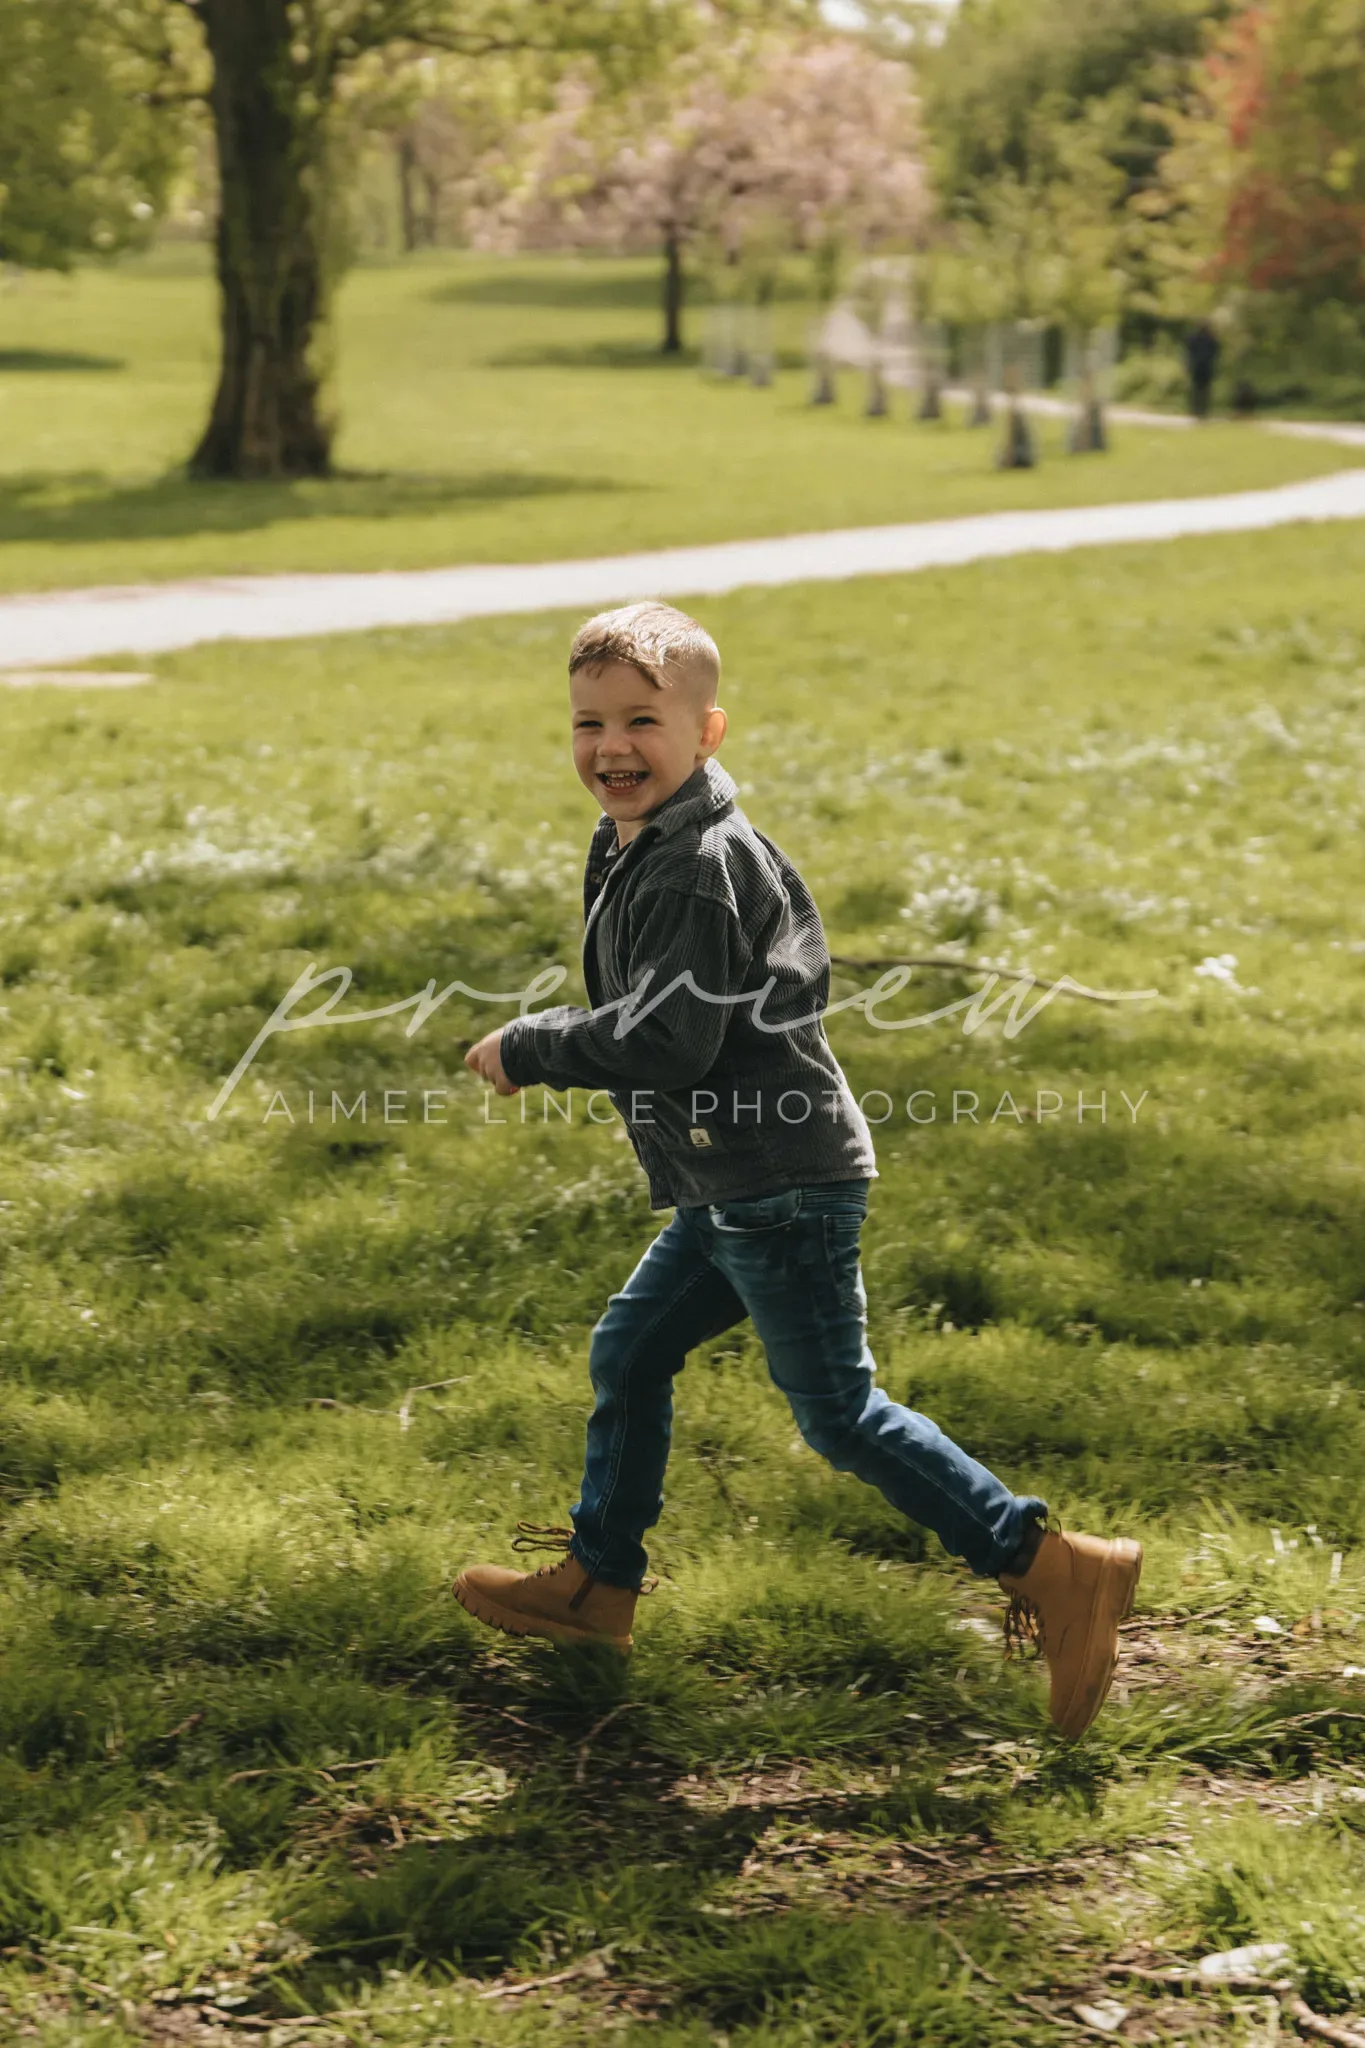 A young boy joyfully running on a grassy field in a park, with blooming trees and a path in the background. He's wearing a black jacket, blue jeans, and tan boots.